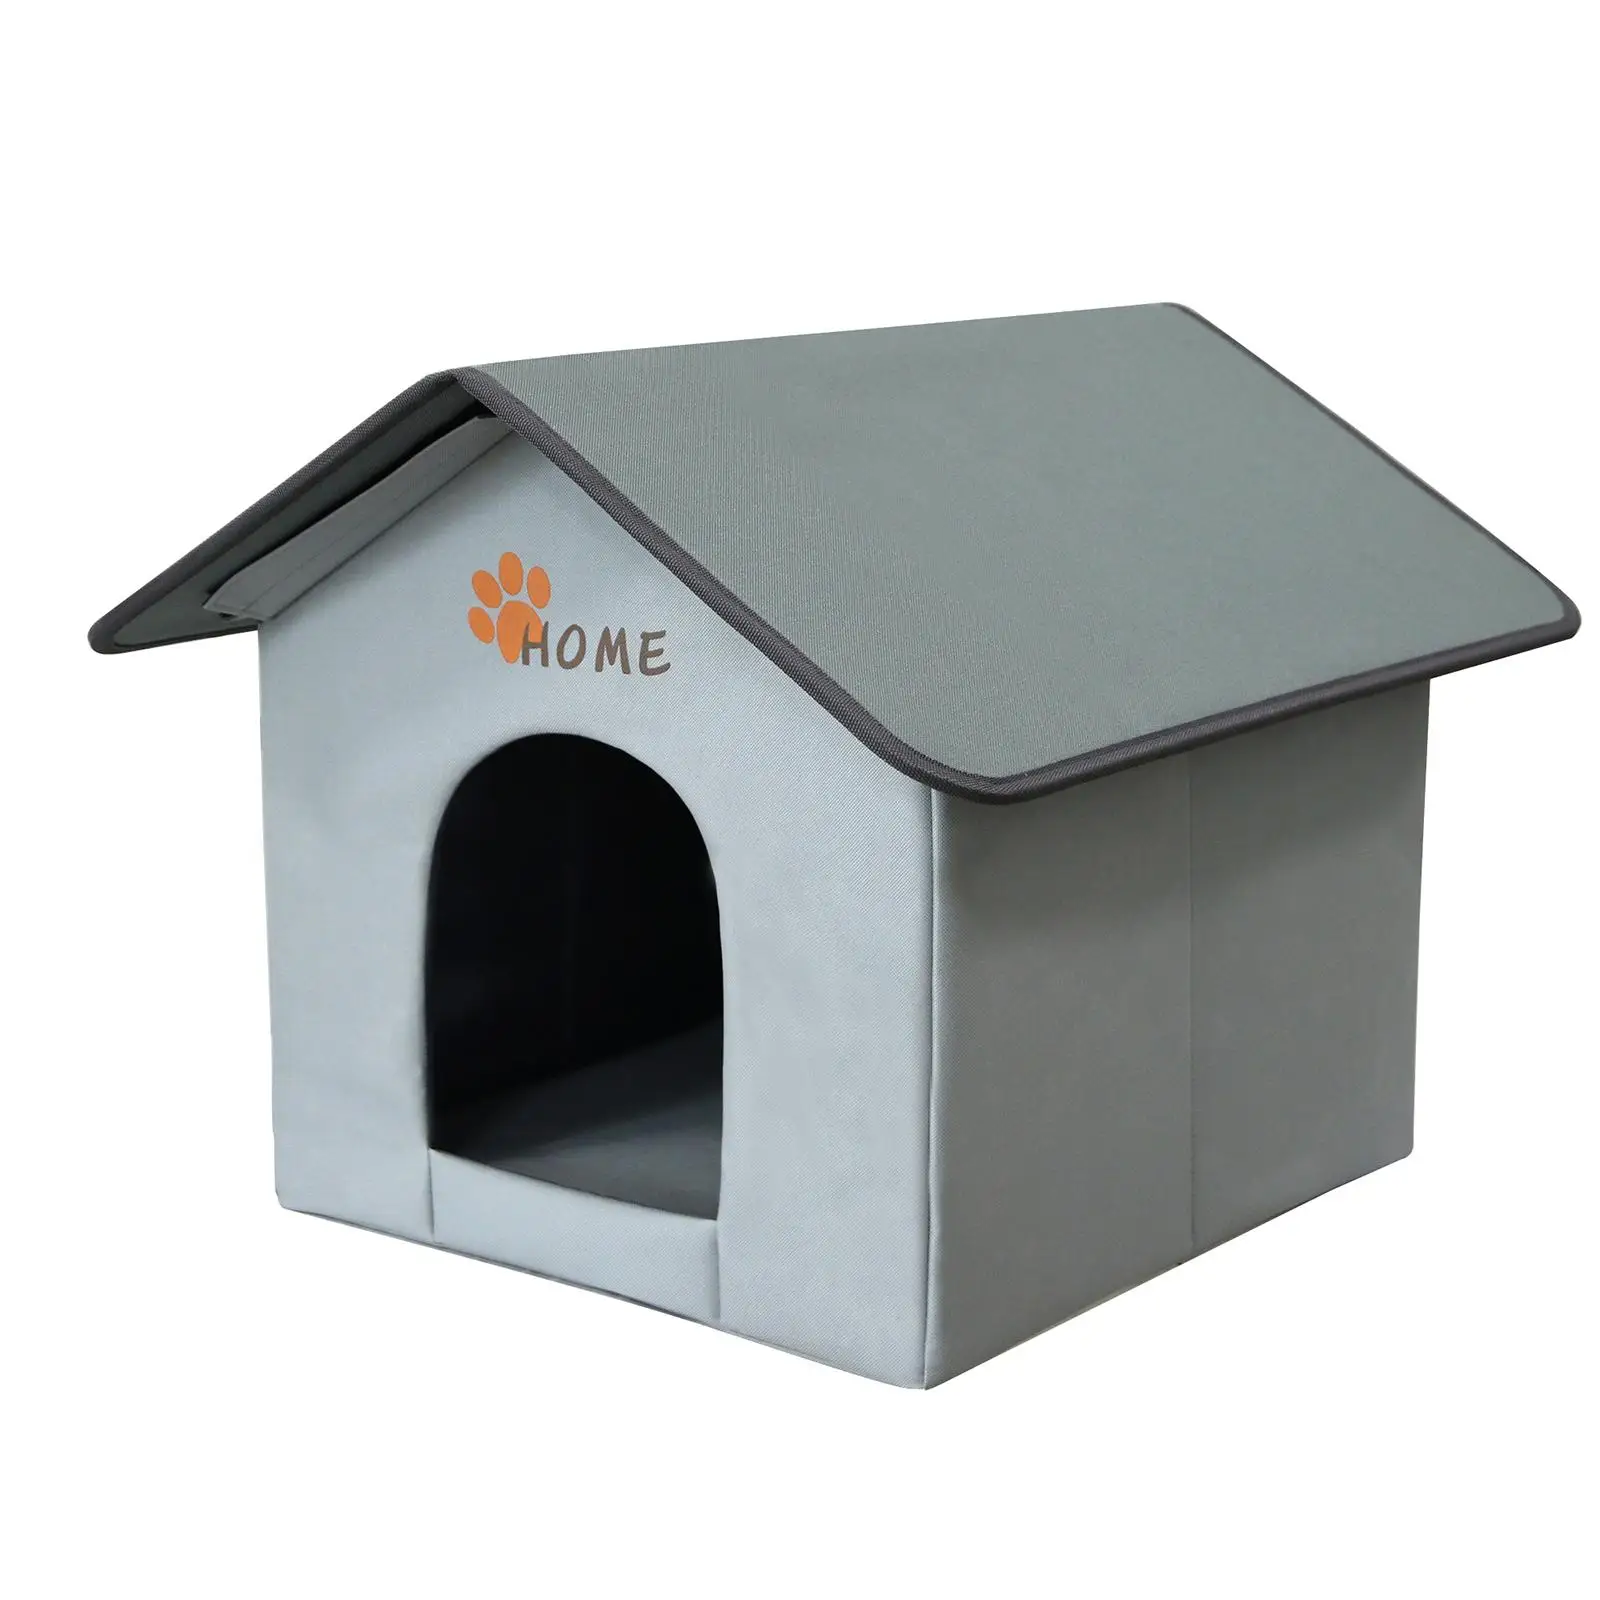 Outdoor Cat House Sleeping Weatherproof Warm House Feral Cat Shelter Cave Pet Bed for Lawn Kitten Small Medium Cats Puppy Garden